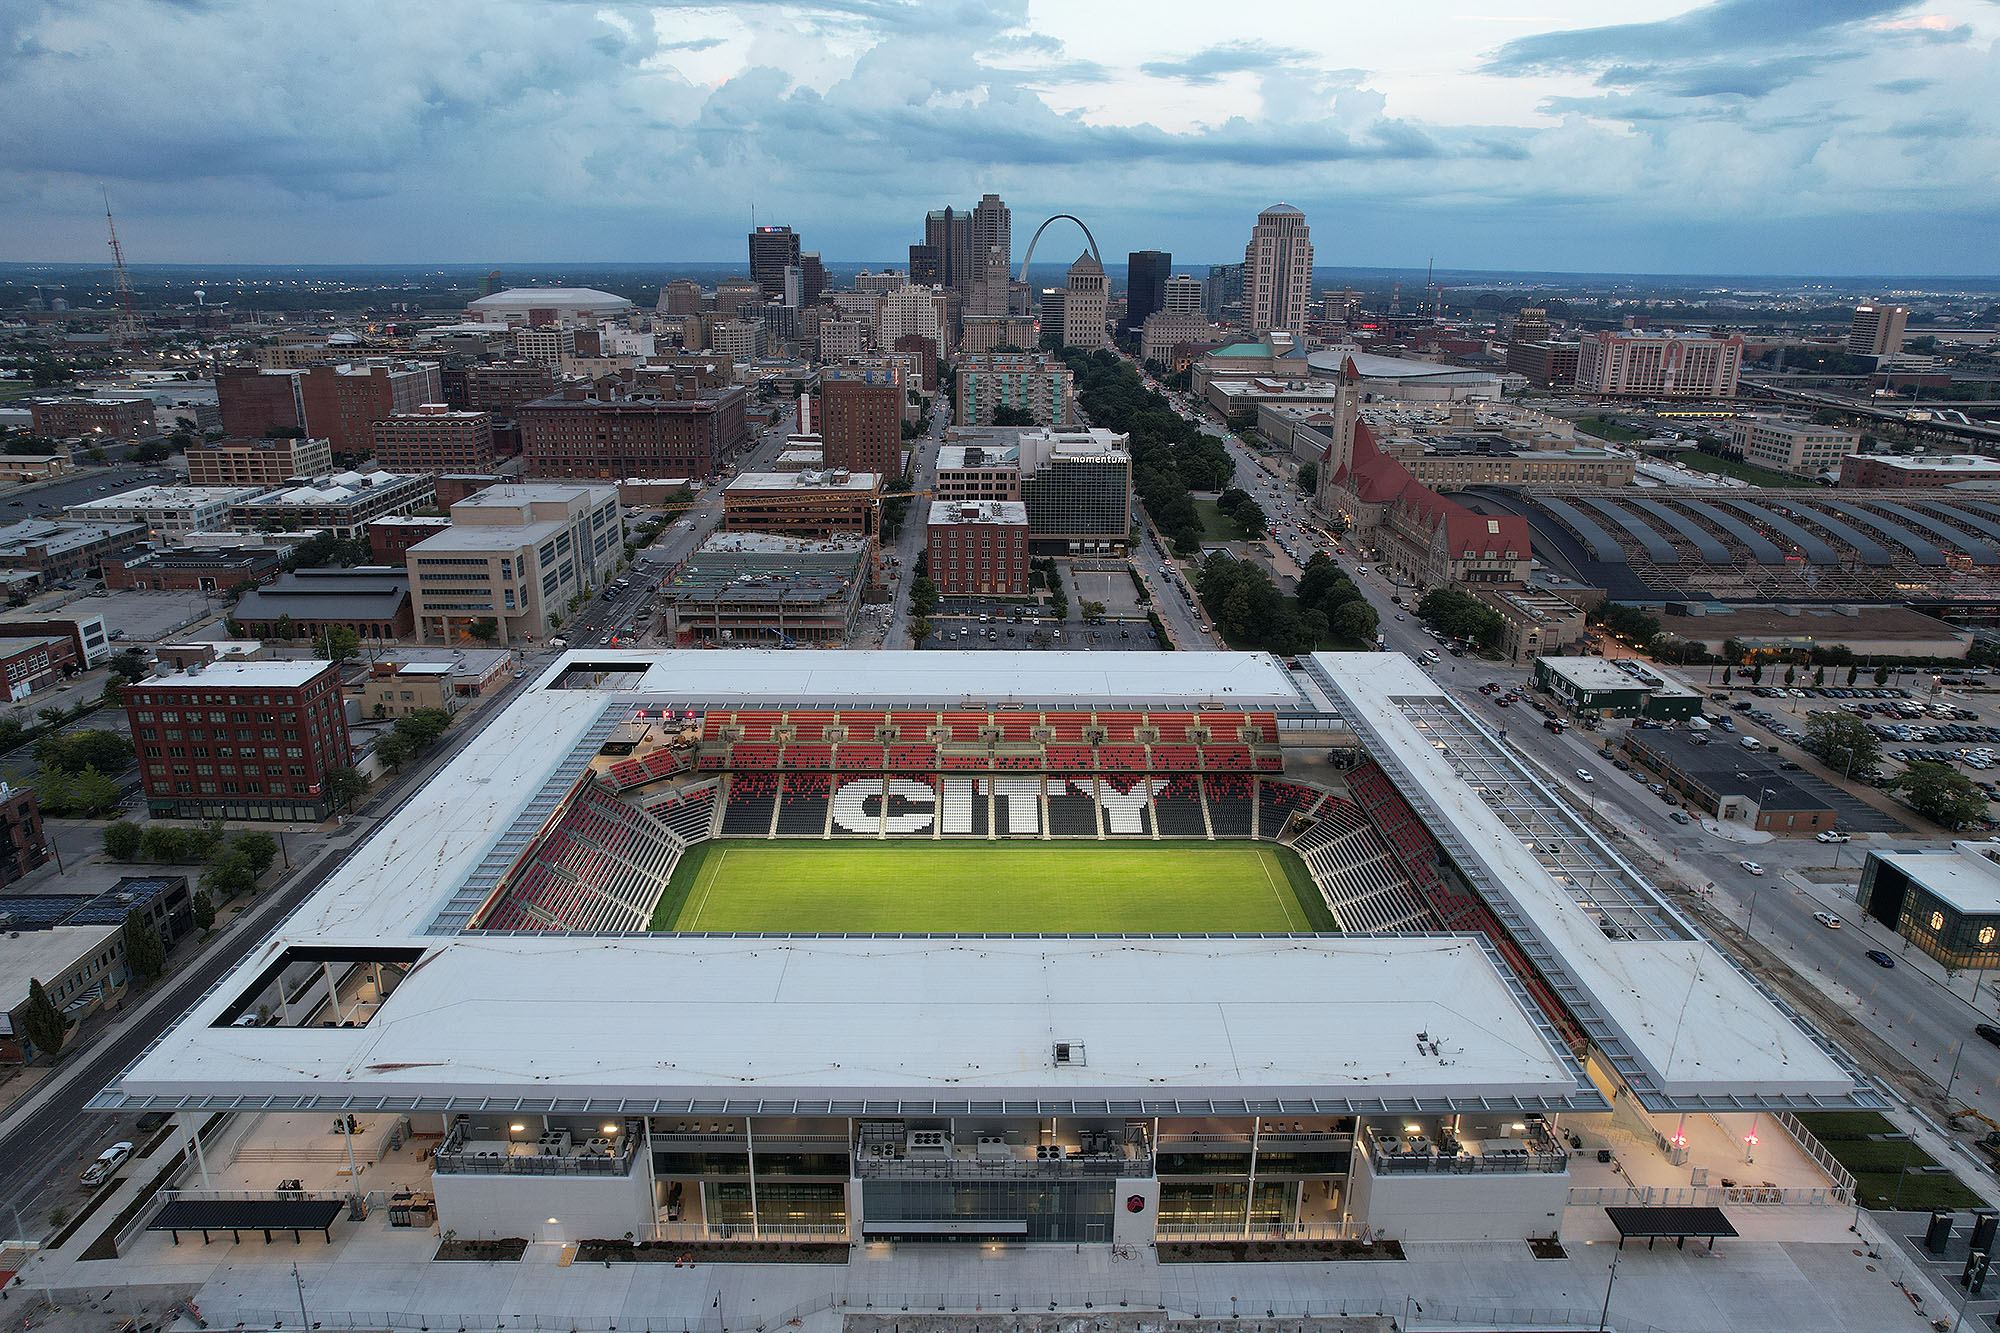 St. Louis City SC support section season tickets to go on sale